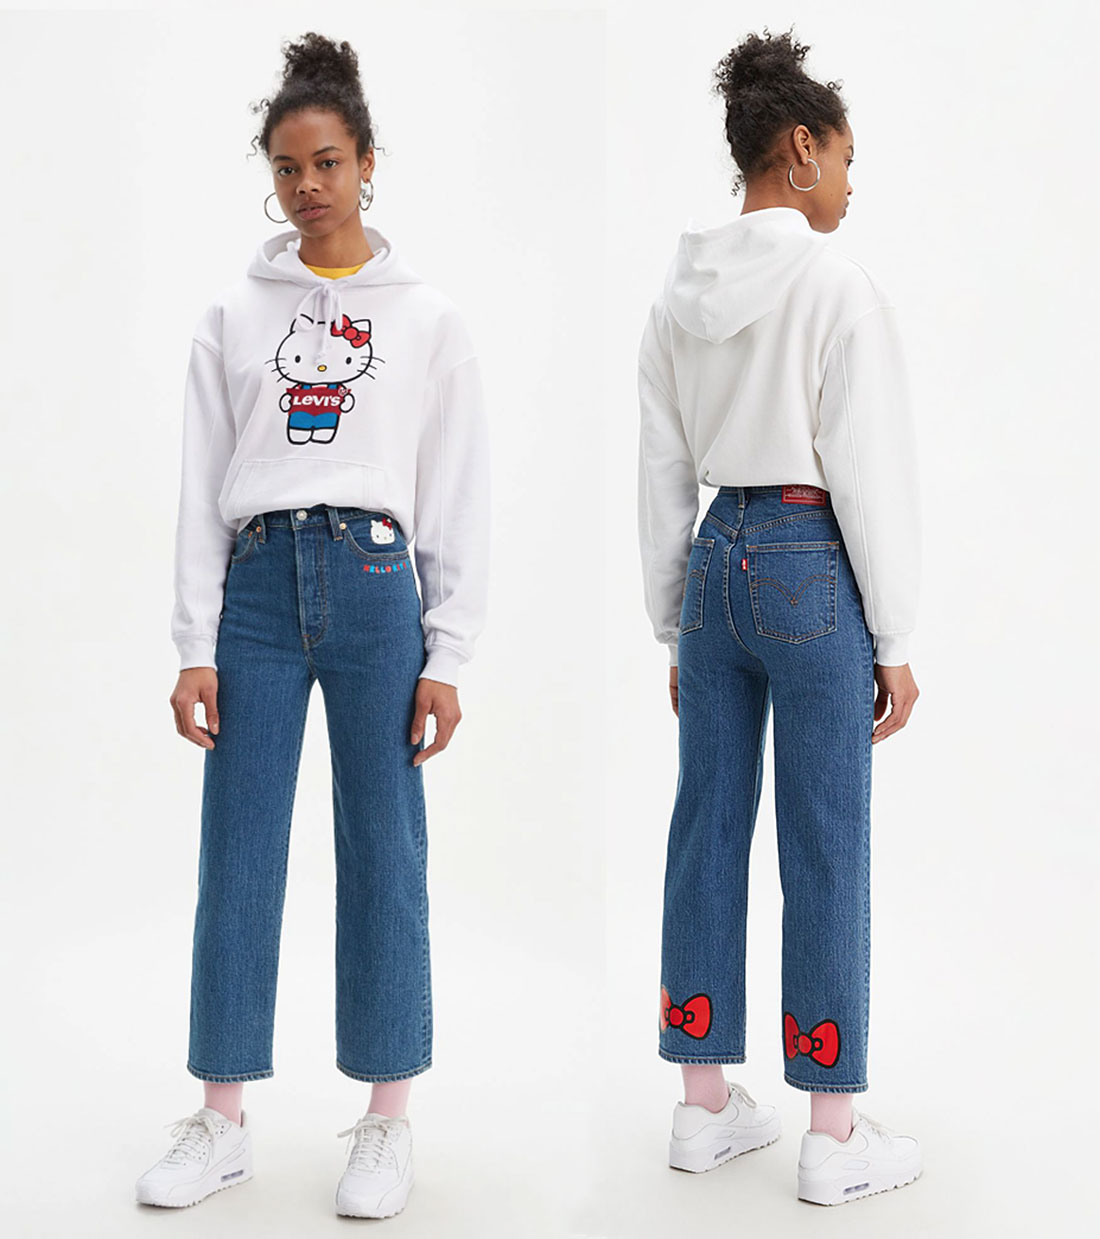 Levi's x Hello Kitty Limited-Edition Collection 2019: Pics